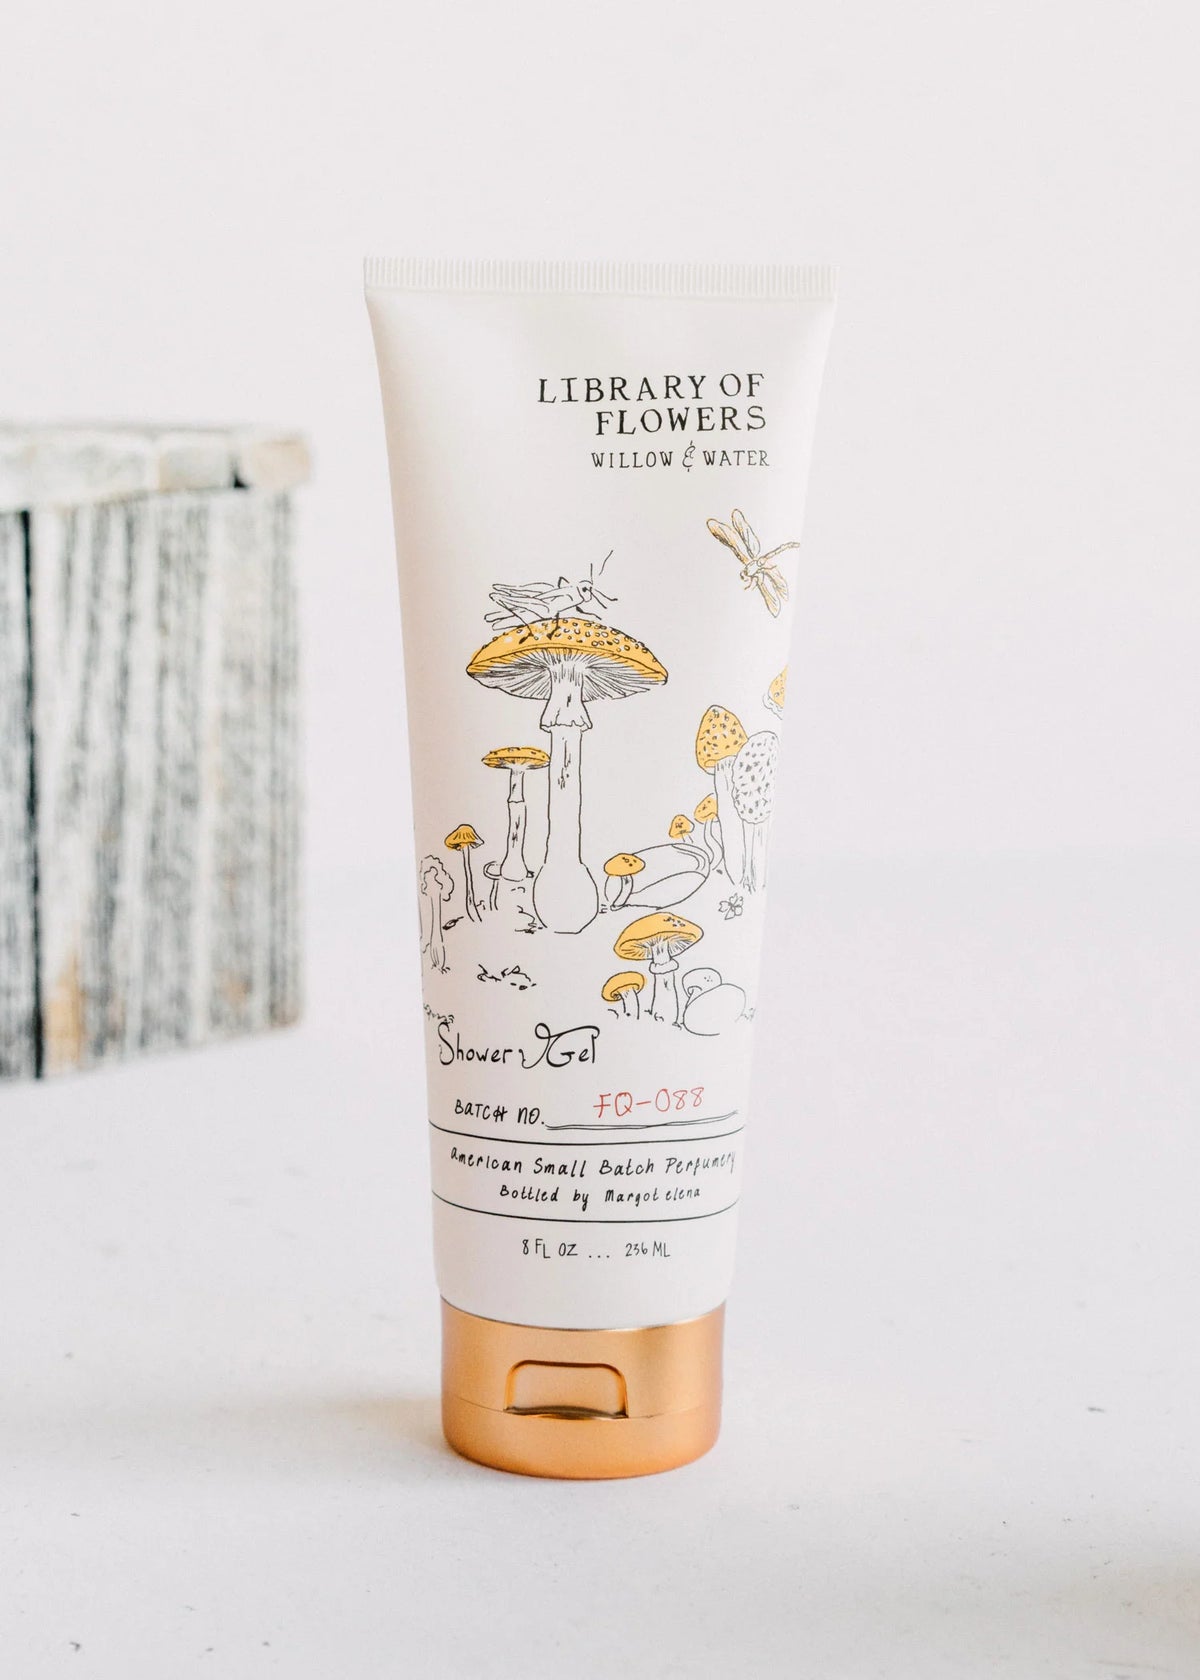 A tube of Margot Elena brand "Library of Flowers Willow & Water" shower gel, featuring whimsical illustrations of mushrooms and plants from the Gardens of Imagination, standing upright against a soft, neutral background.